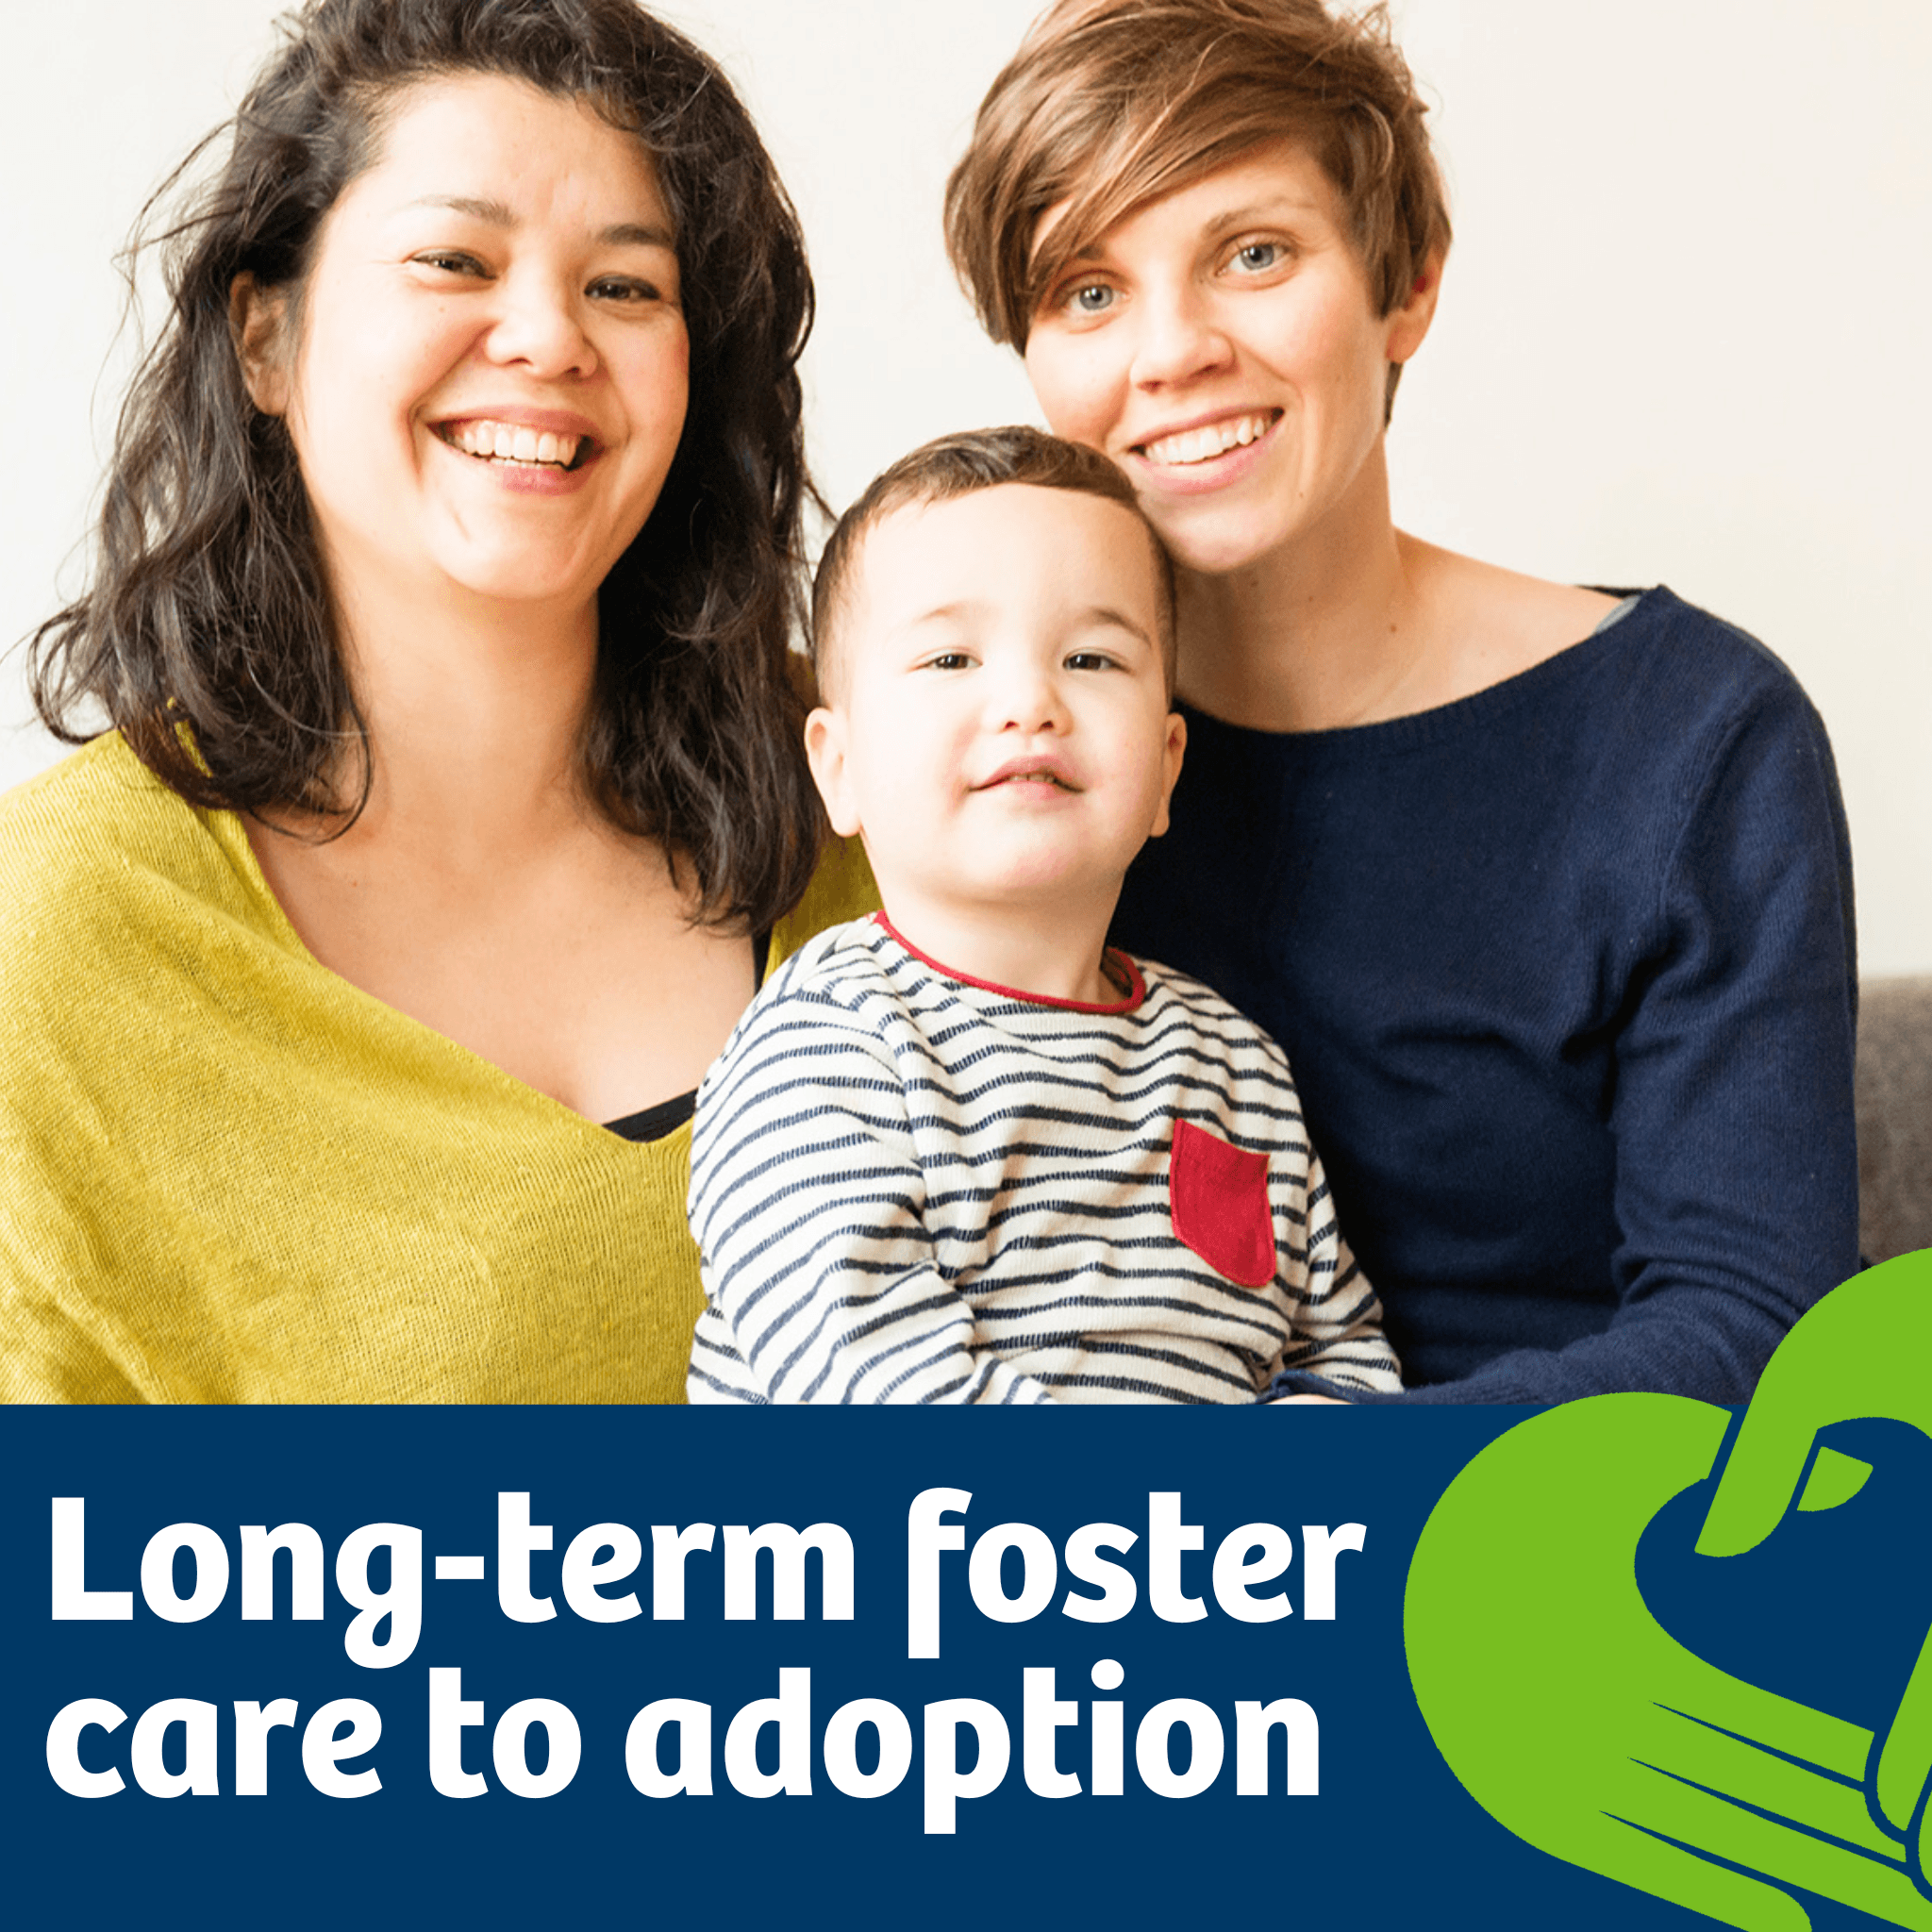 Long-term foster care to adoption